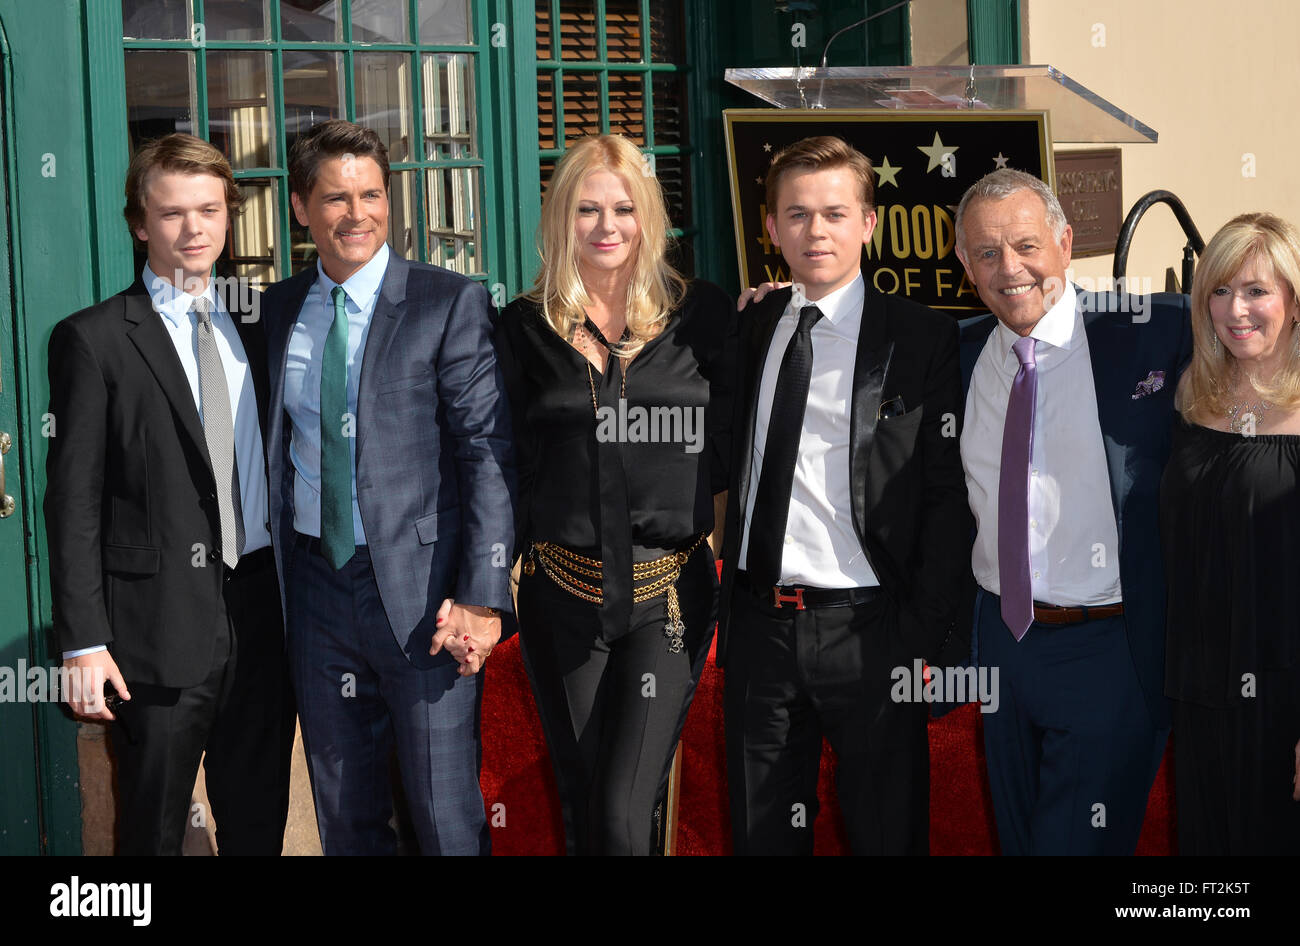 LOS ANGELES, CA - DECEMBER 8, 2015: Actor Rob Lowe with wife Sheryl Berkoff, sons Edward & John, & his parents at Lowe's star ceremony on Hollywood Walk of Fame. Stock Photo